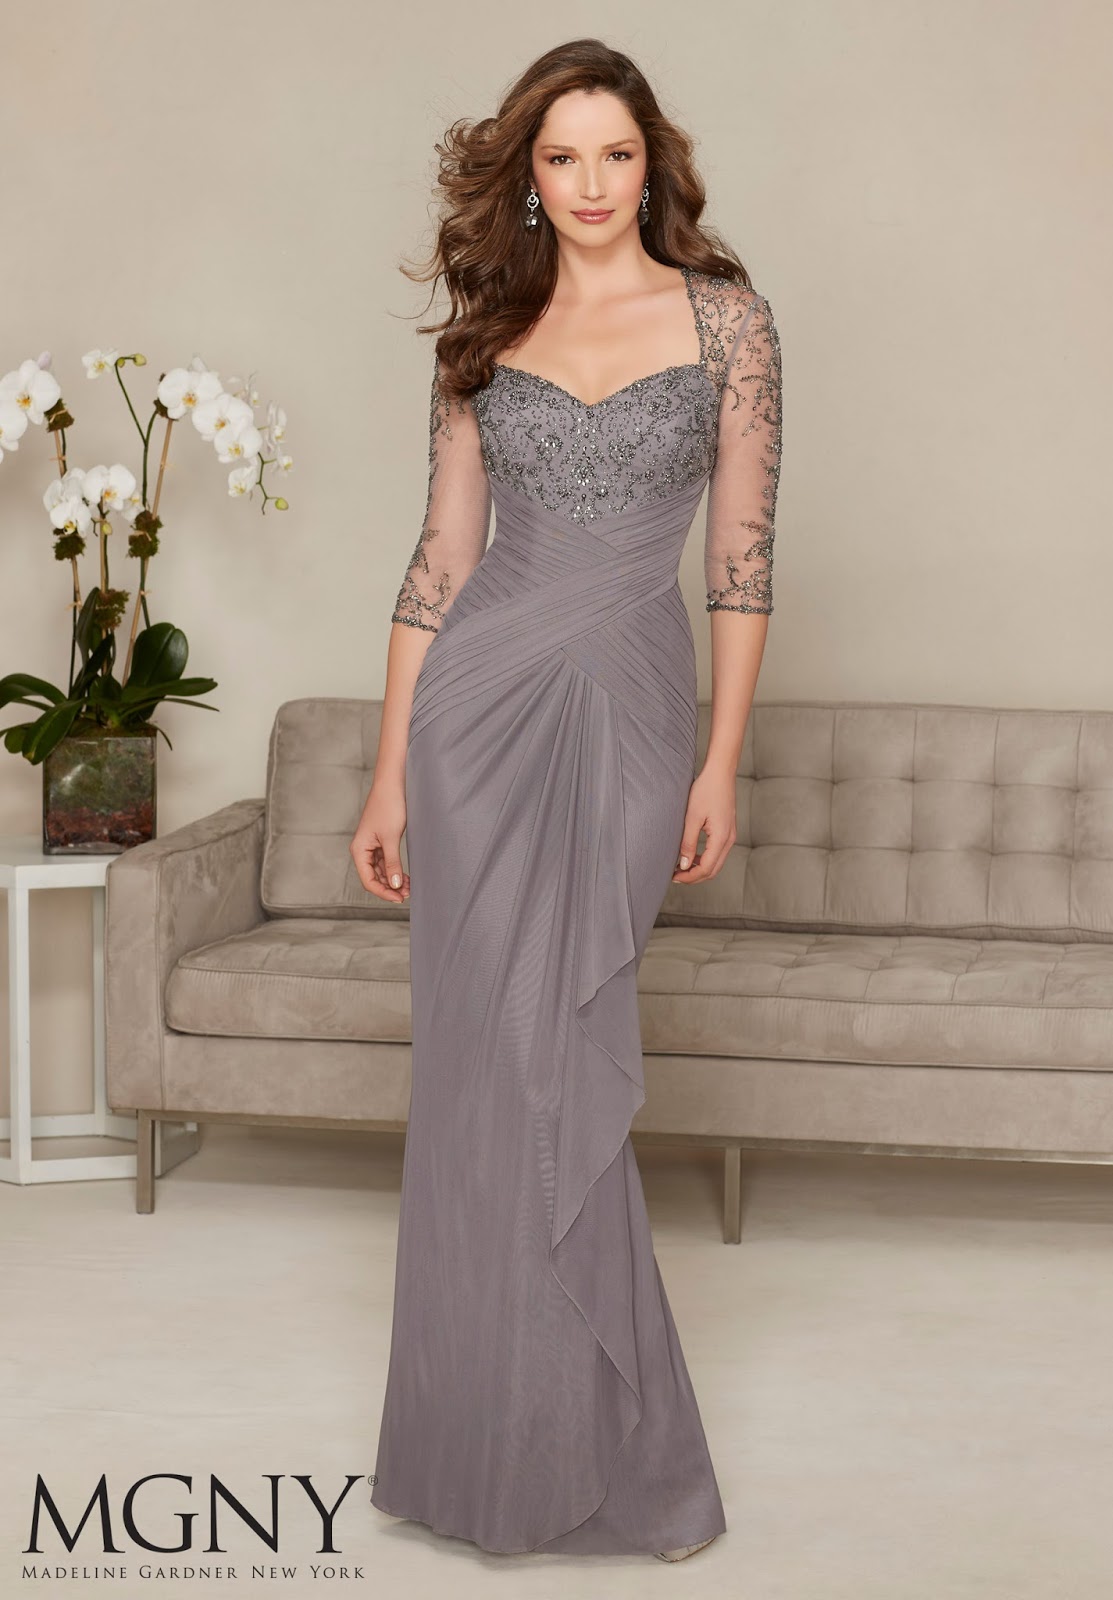 Brides of America Online Store: Stunning Mothers' Dresses For Your